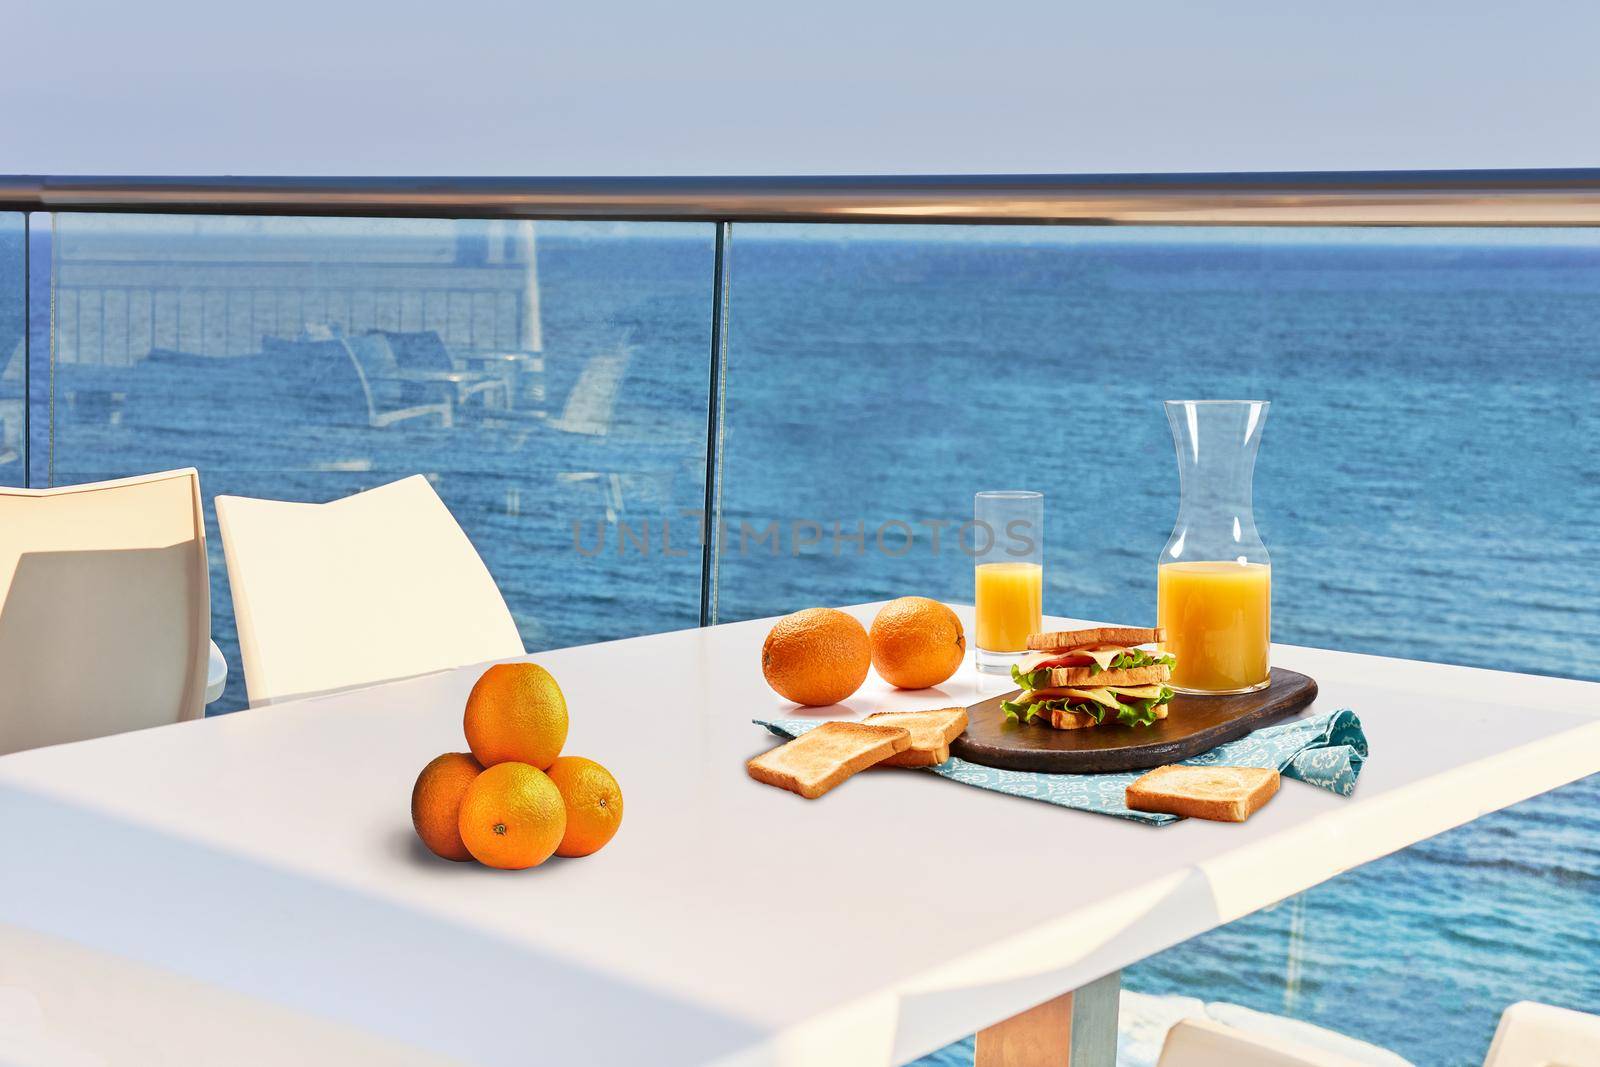 Table for two on outdoor hotel balcony with a sea view. European vacation breakfast, food selfie. Concept of a rest and healthy nutrition. There are toasts, sandwich, orange juice.